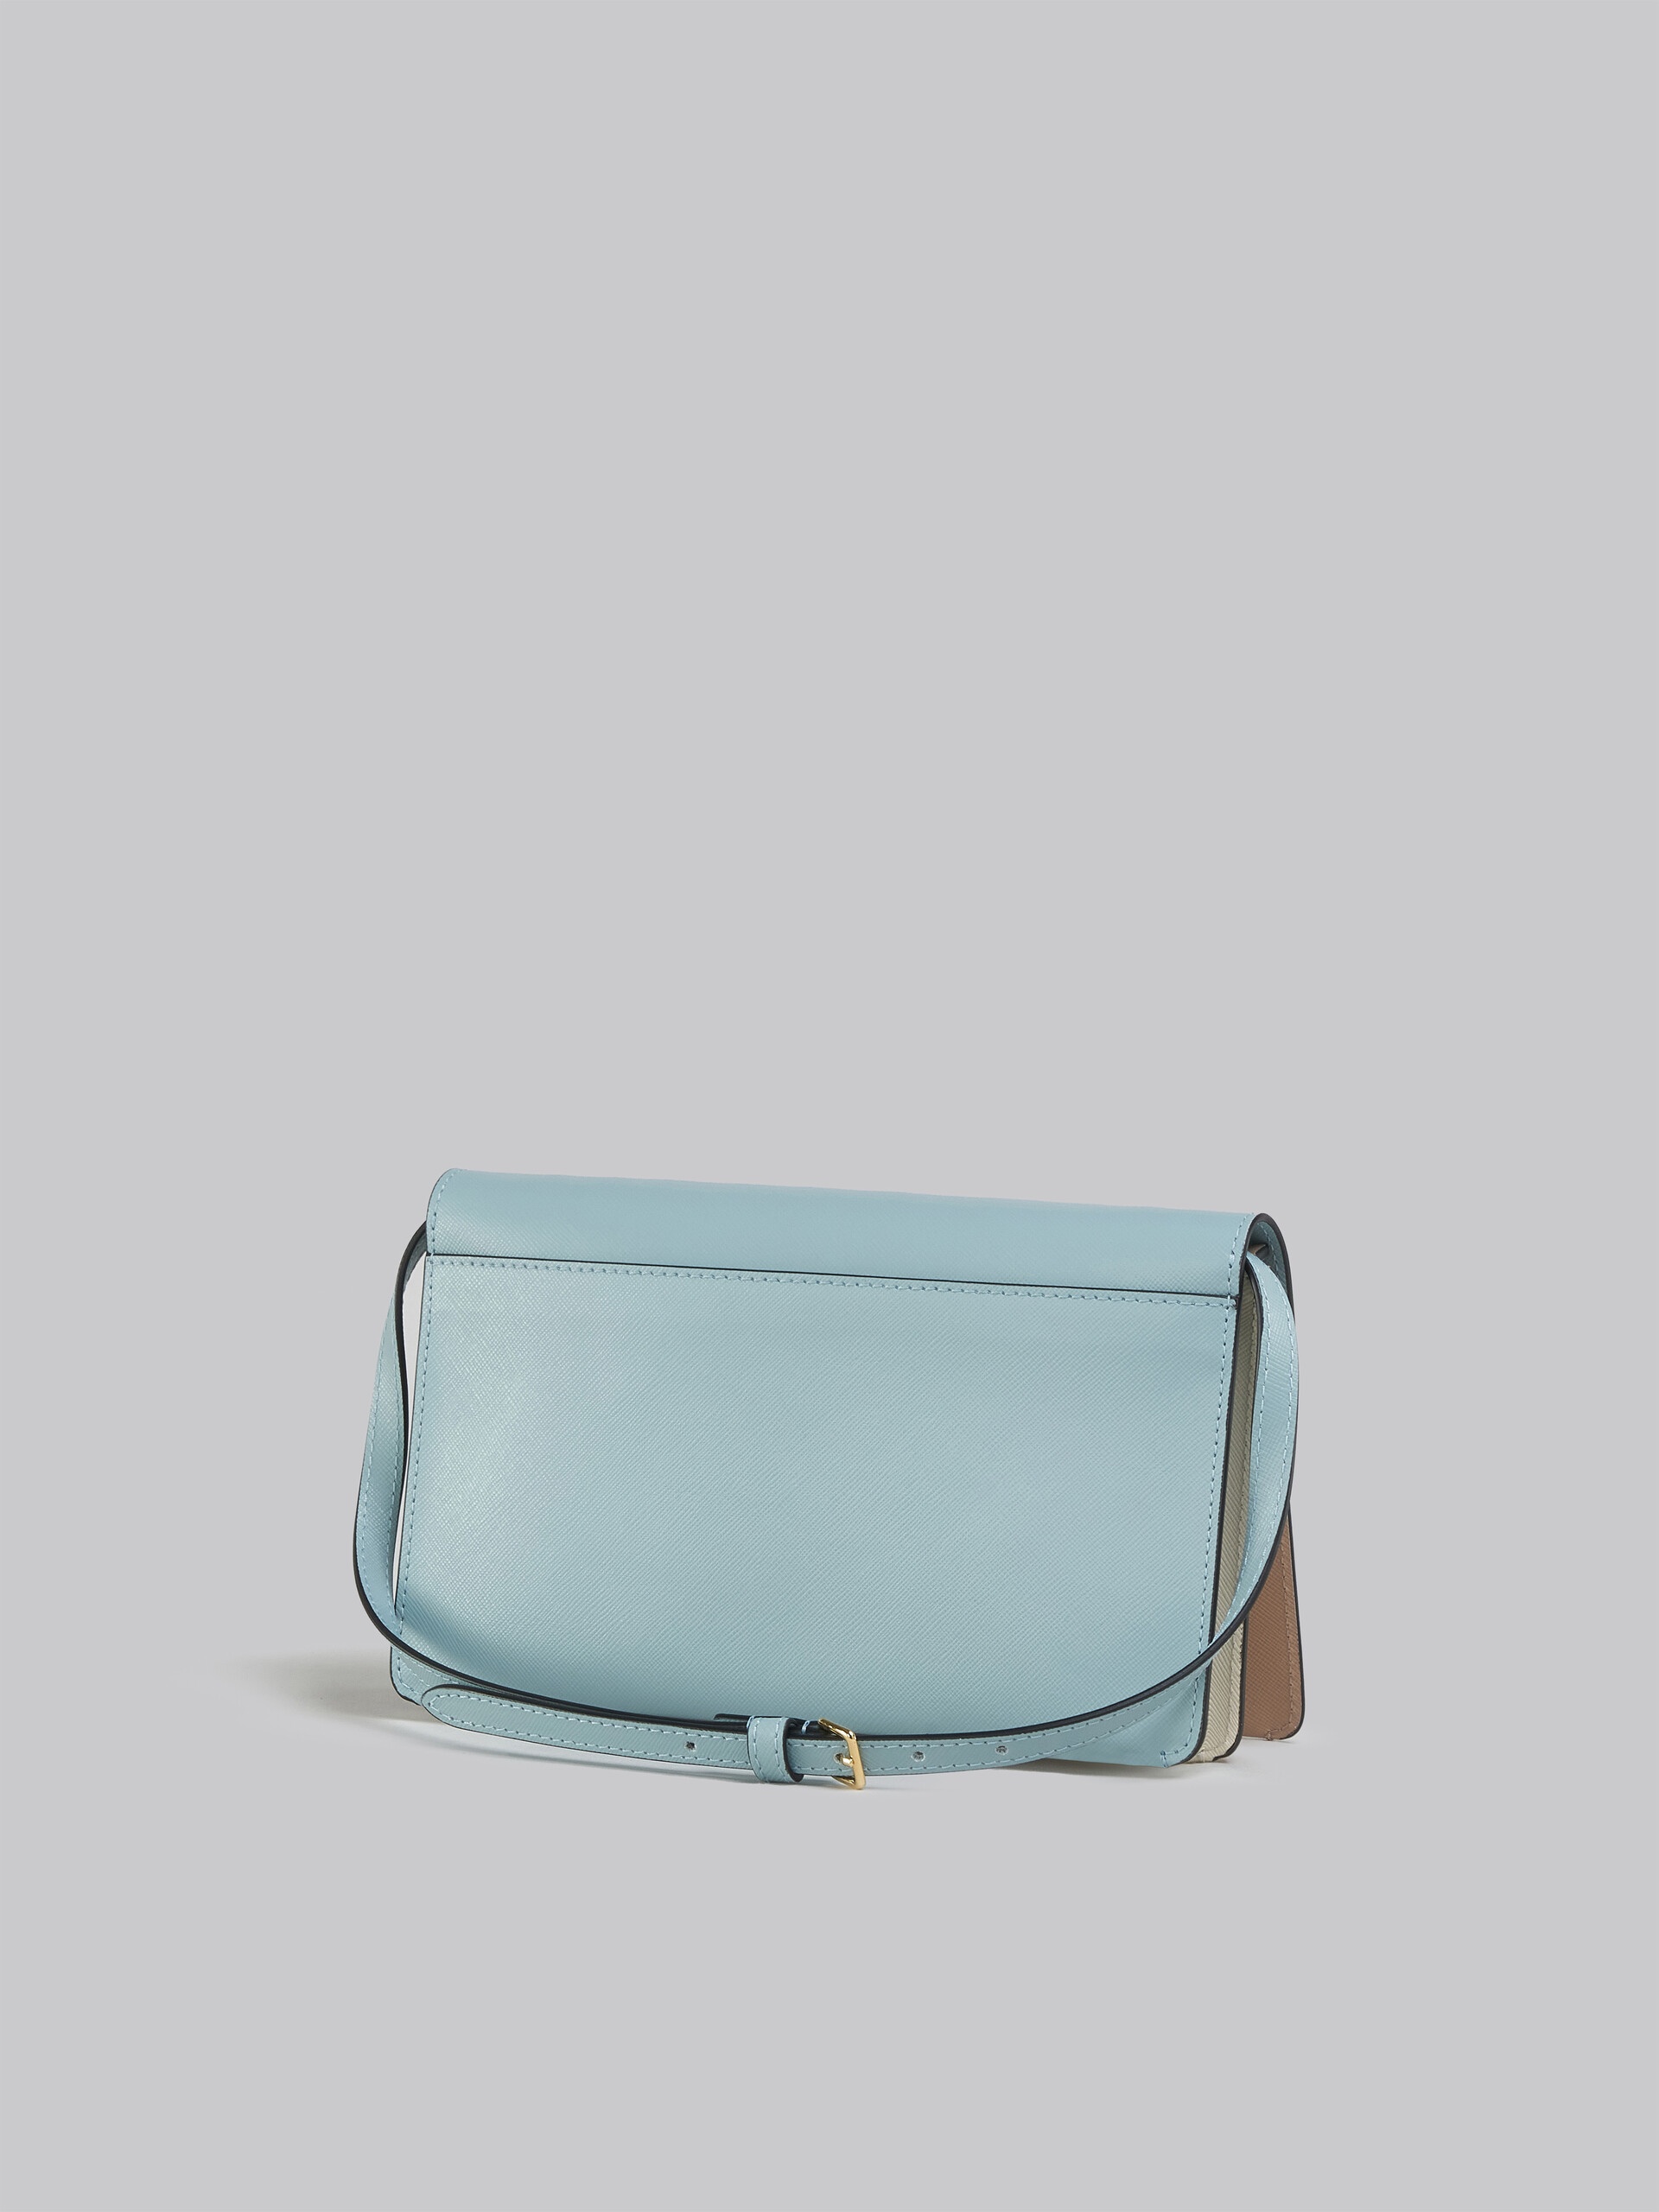 TRUNK CLUTCH IN LIGHT BLUE BEIGE AND WHITE SAFFIANO LEATHER - 3